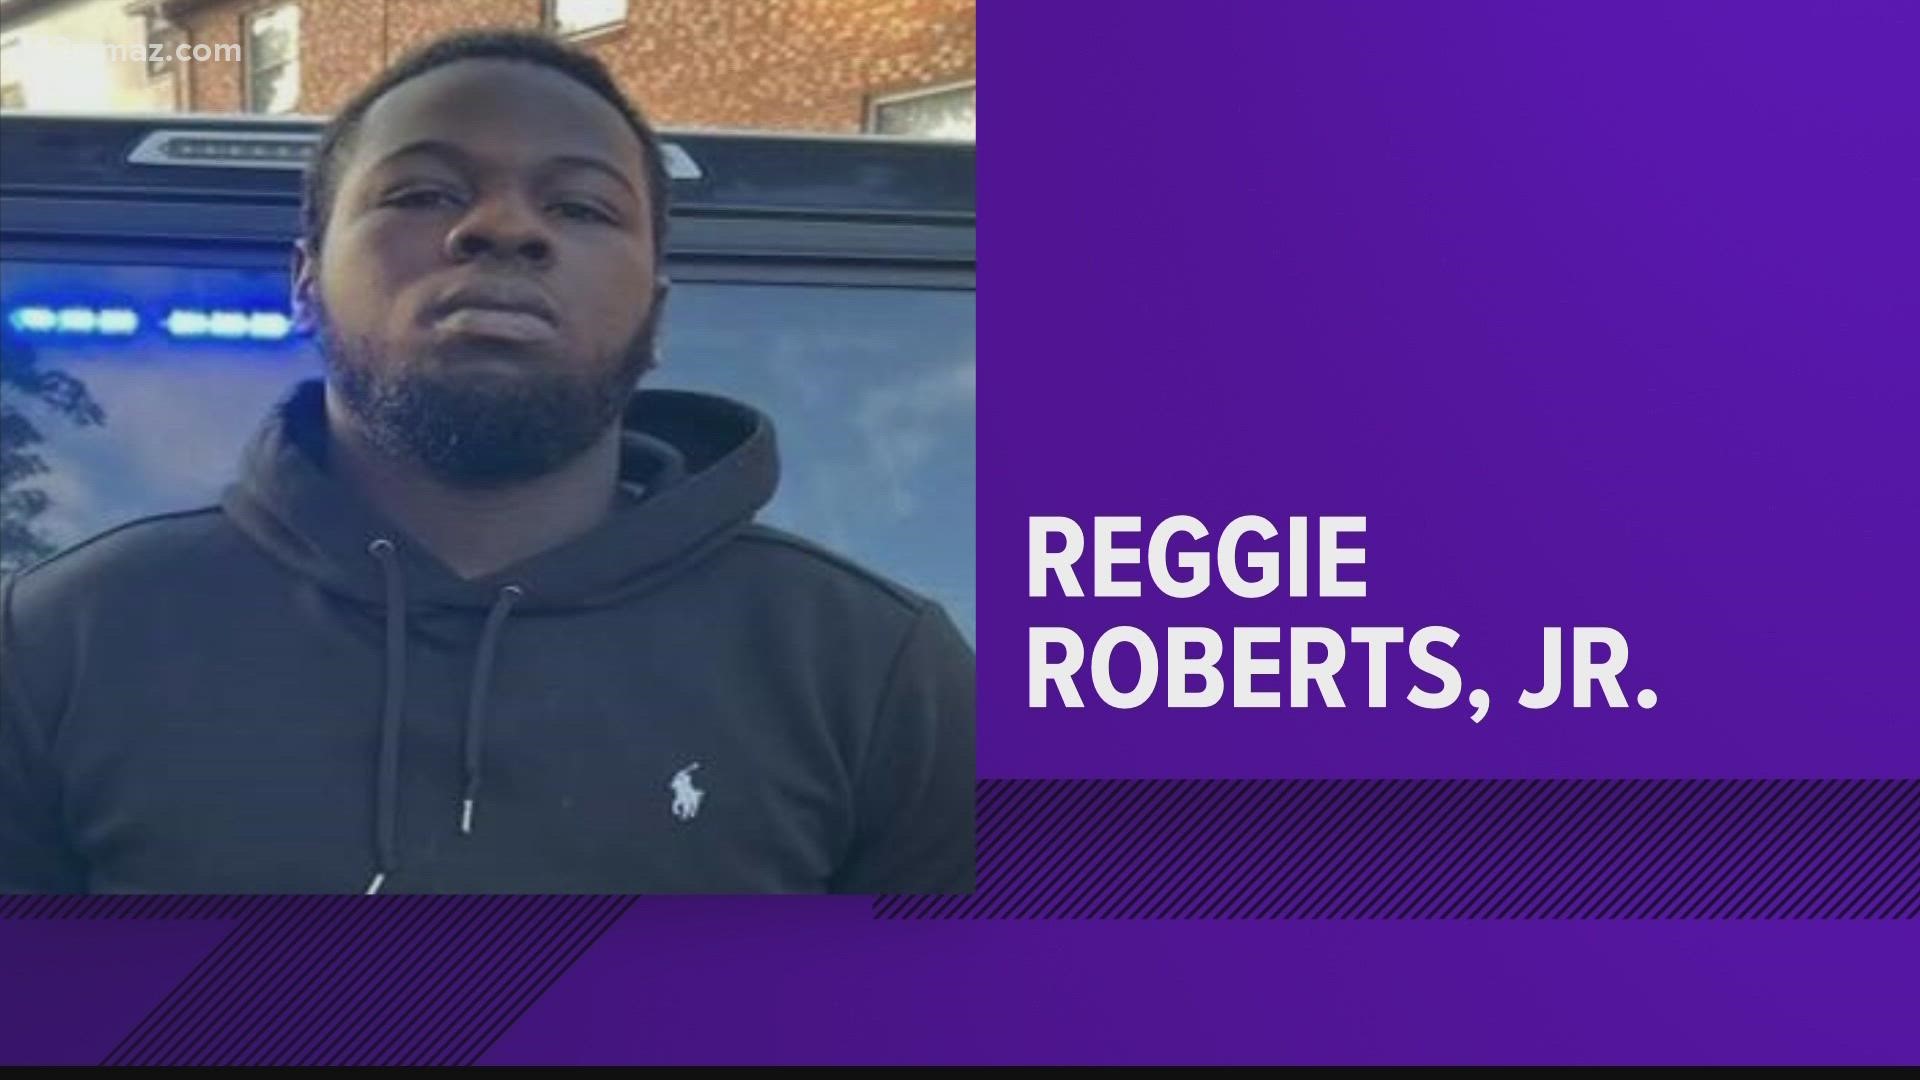 According to a Facebook post, 20-year-old Reggie Roberts of Warner Robins was arrested by US Marshal Officers in Hickory, North Carolina.